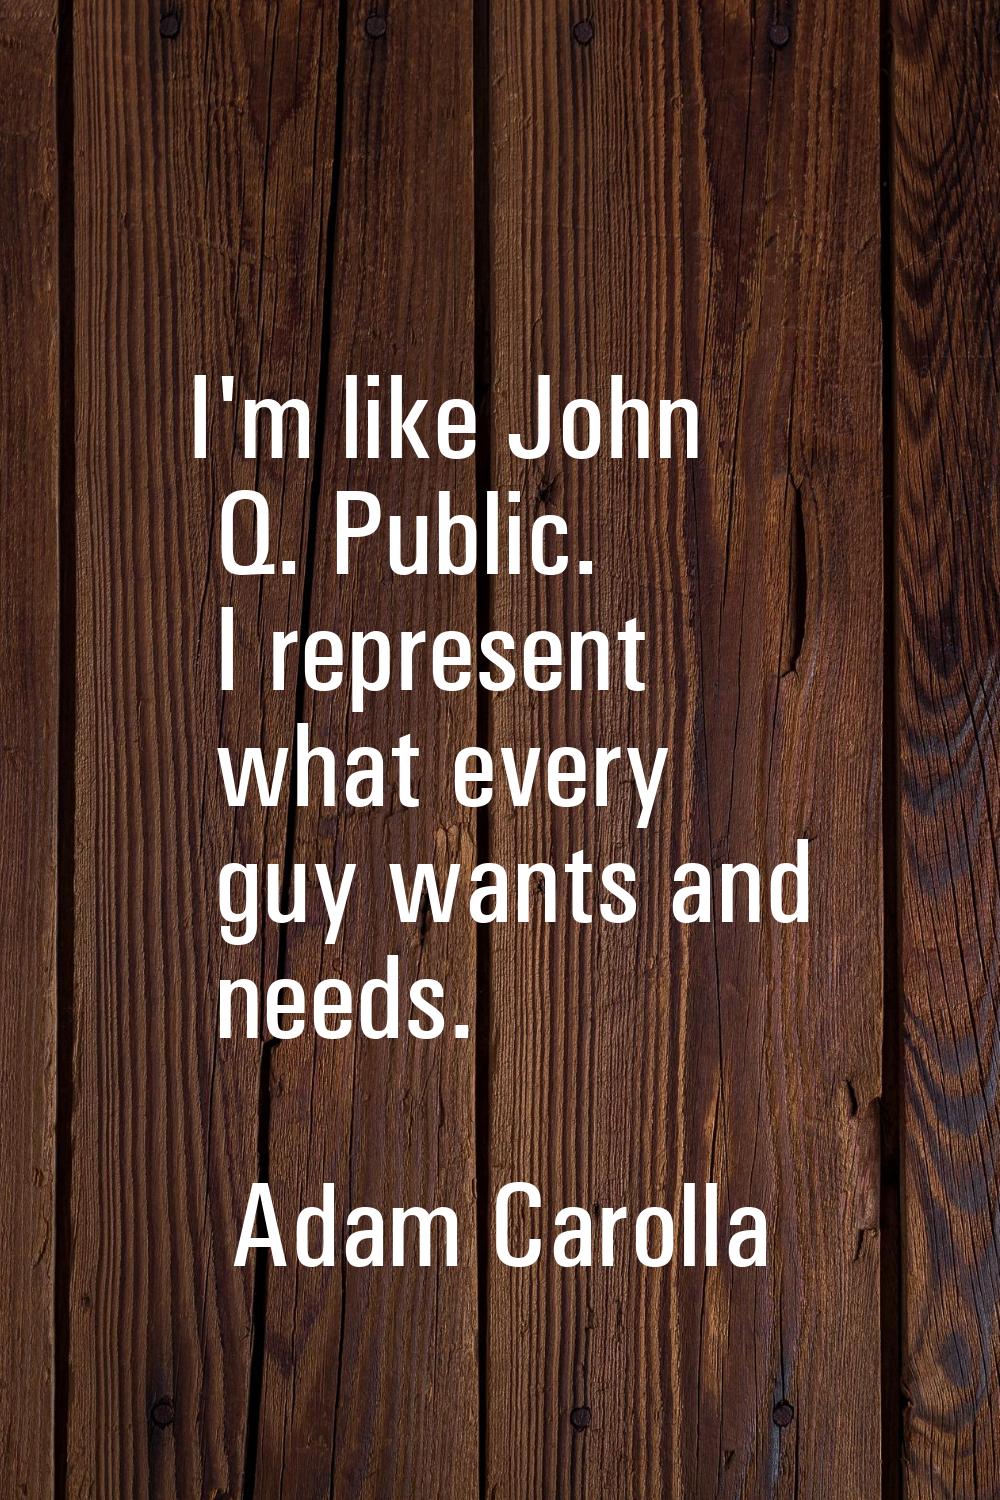 I'm like John Q. Public. I represent what every guy wants and needs.